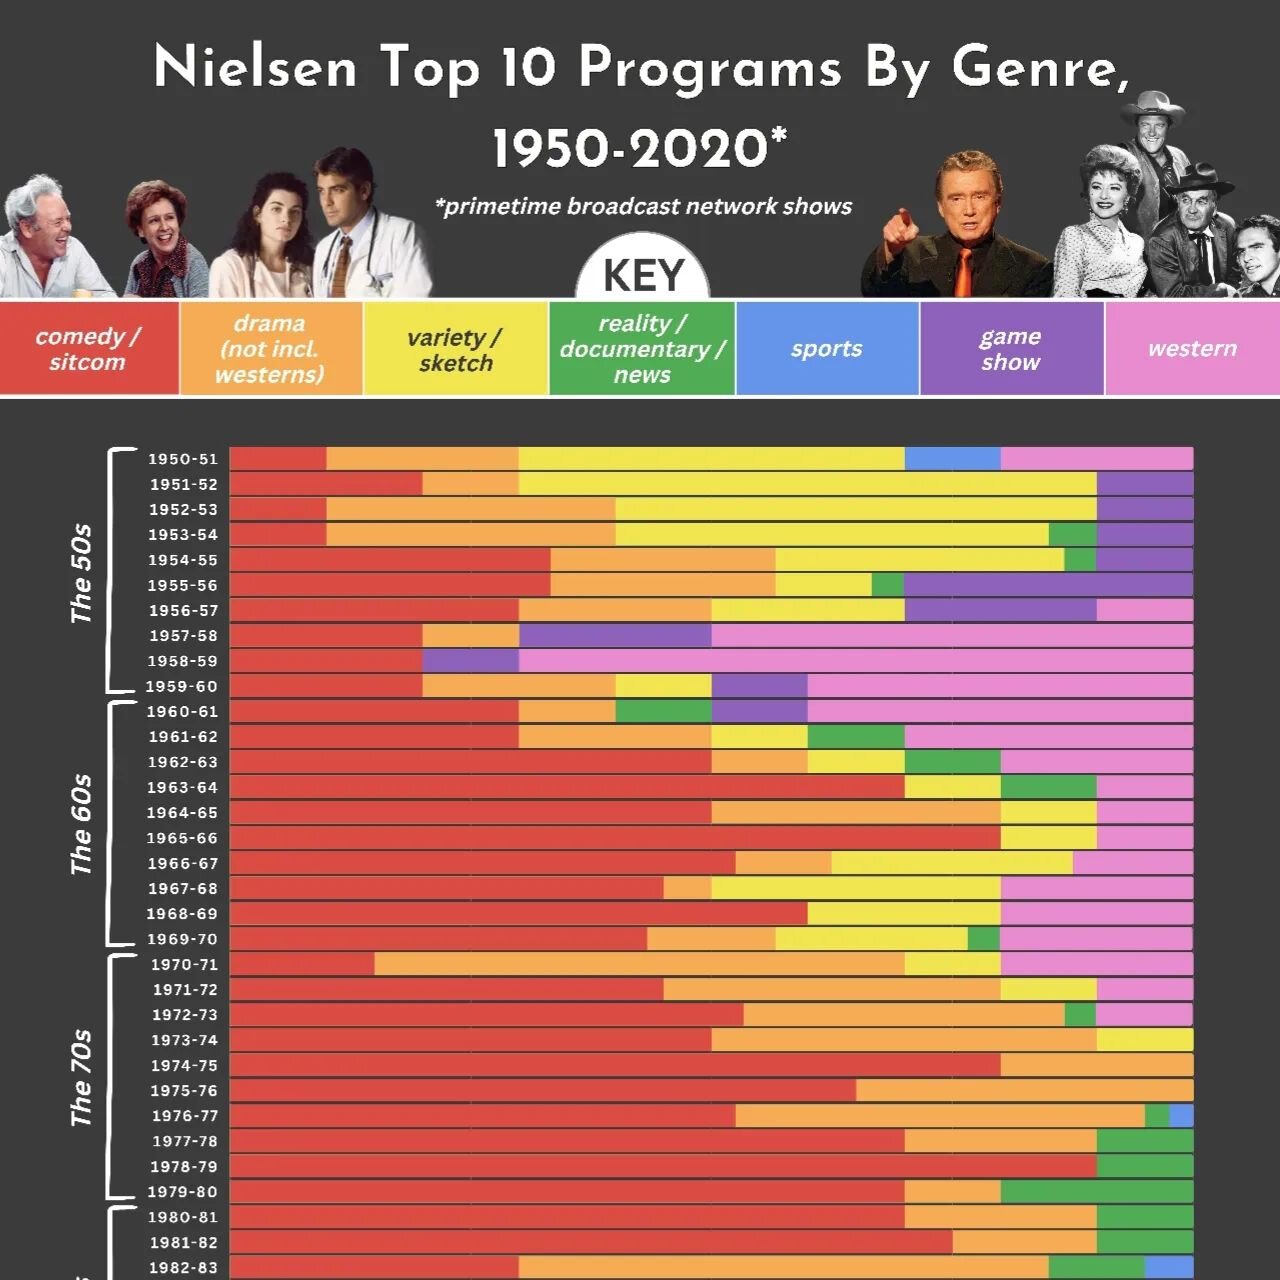 After making seven graphs (one for each decade!) of Nielsen Top 10 data by genre, I decided to combine all the data into one giant view... here is the result (you'll need to swipe to see the top / bottom of the graph, as this one was too big for just